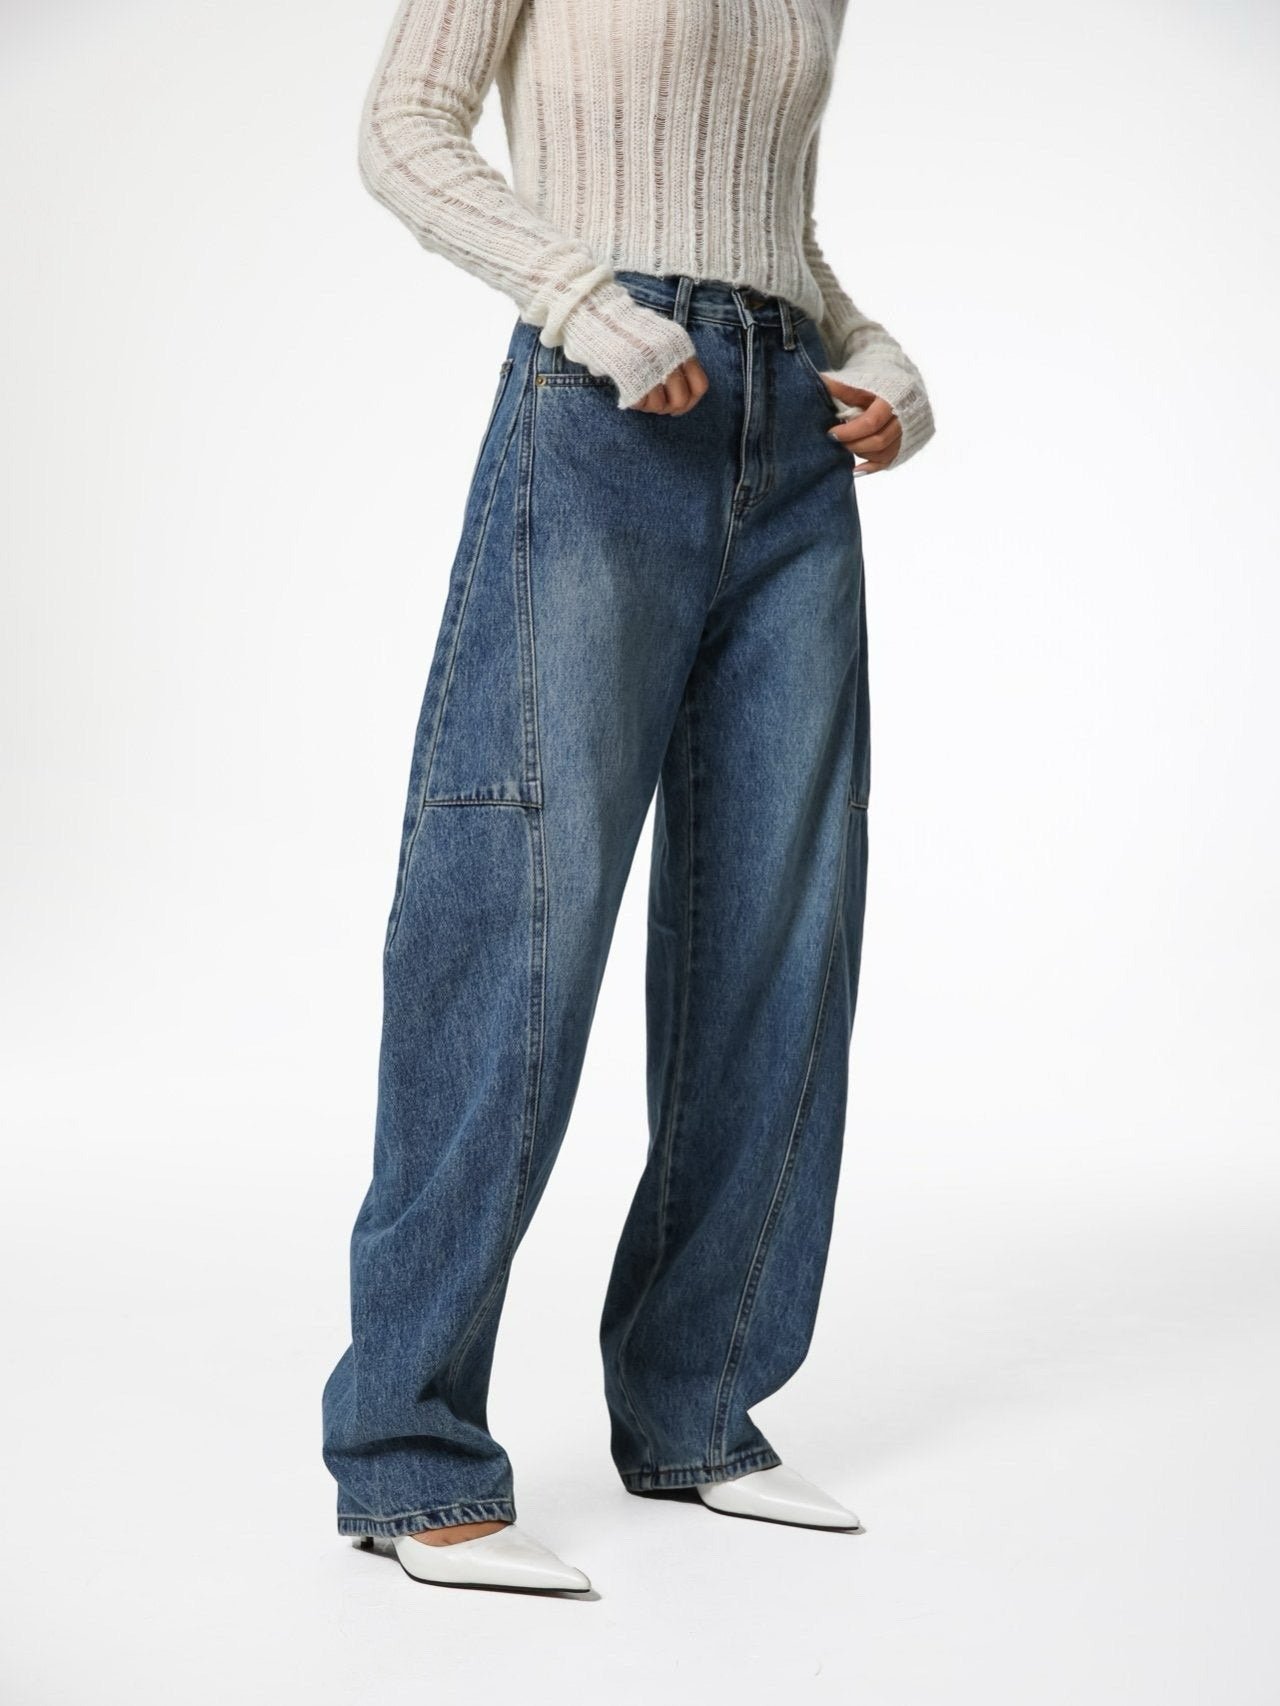 [PAPERMOON] AW / Side Stitch Detail Voulme Blue Denim Jeans